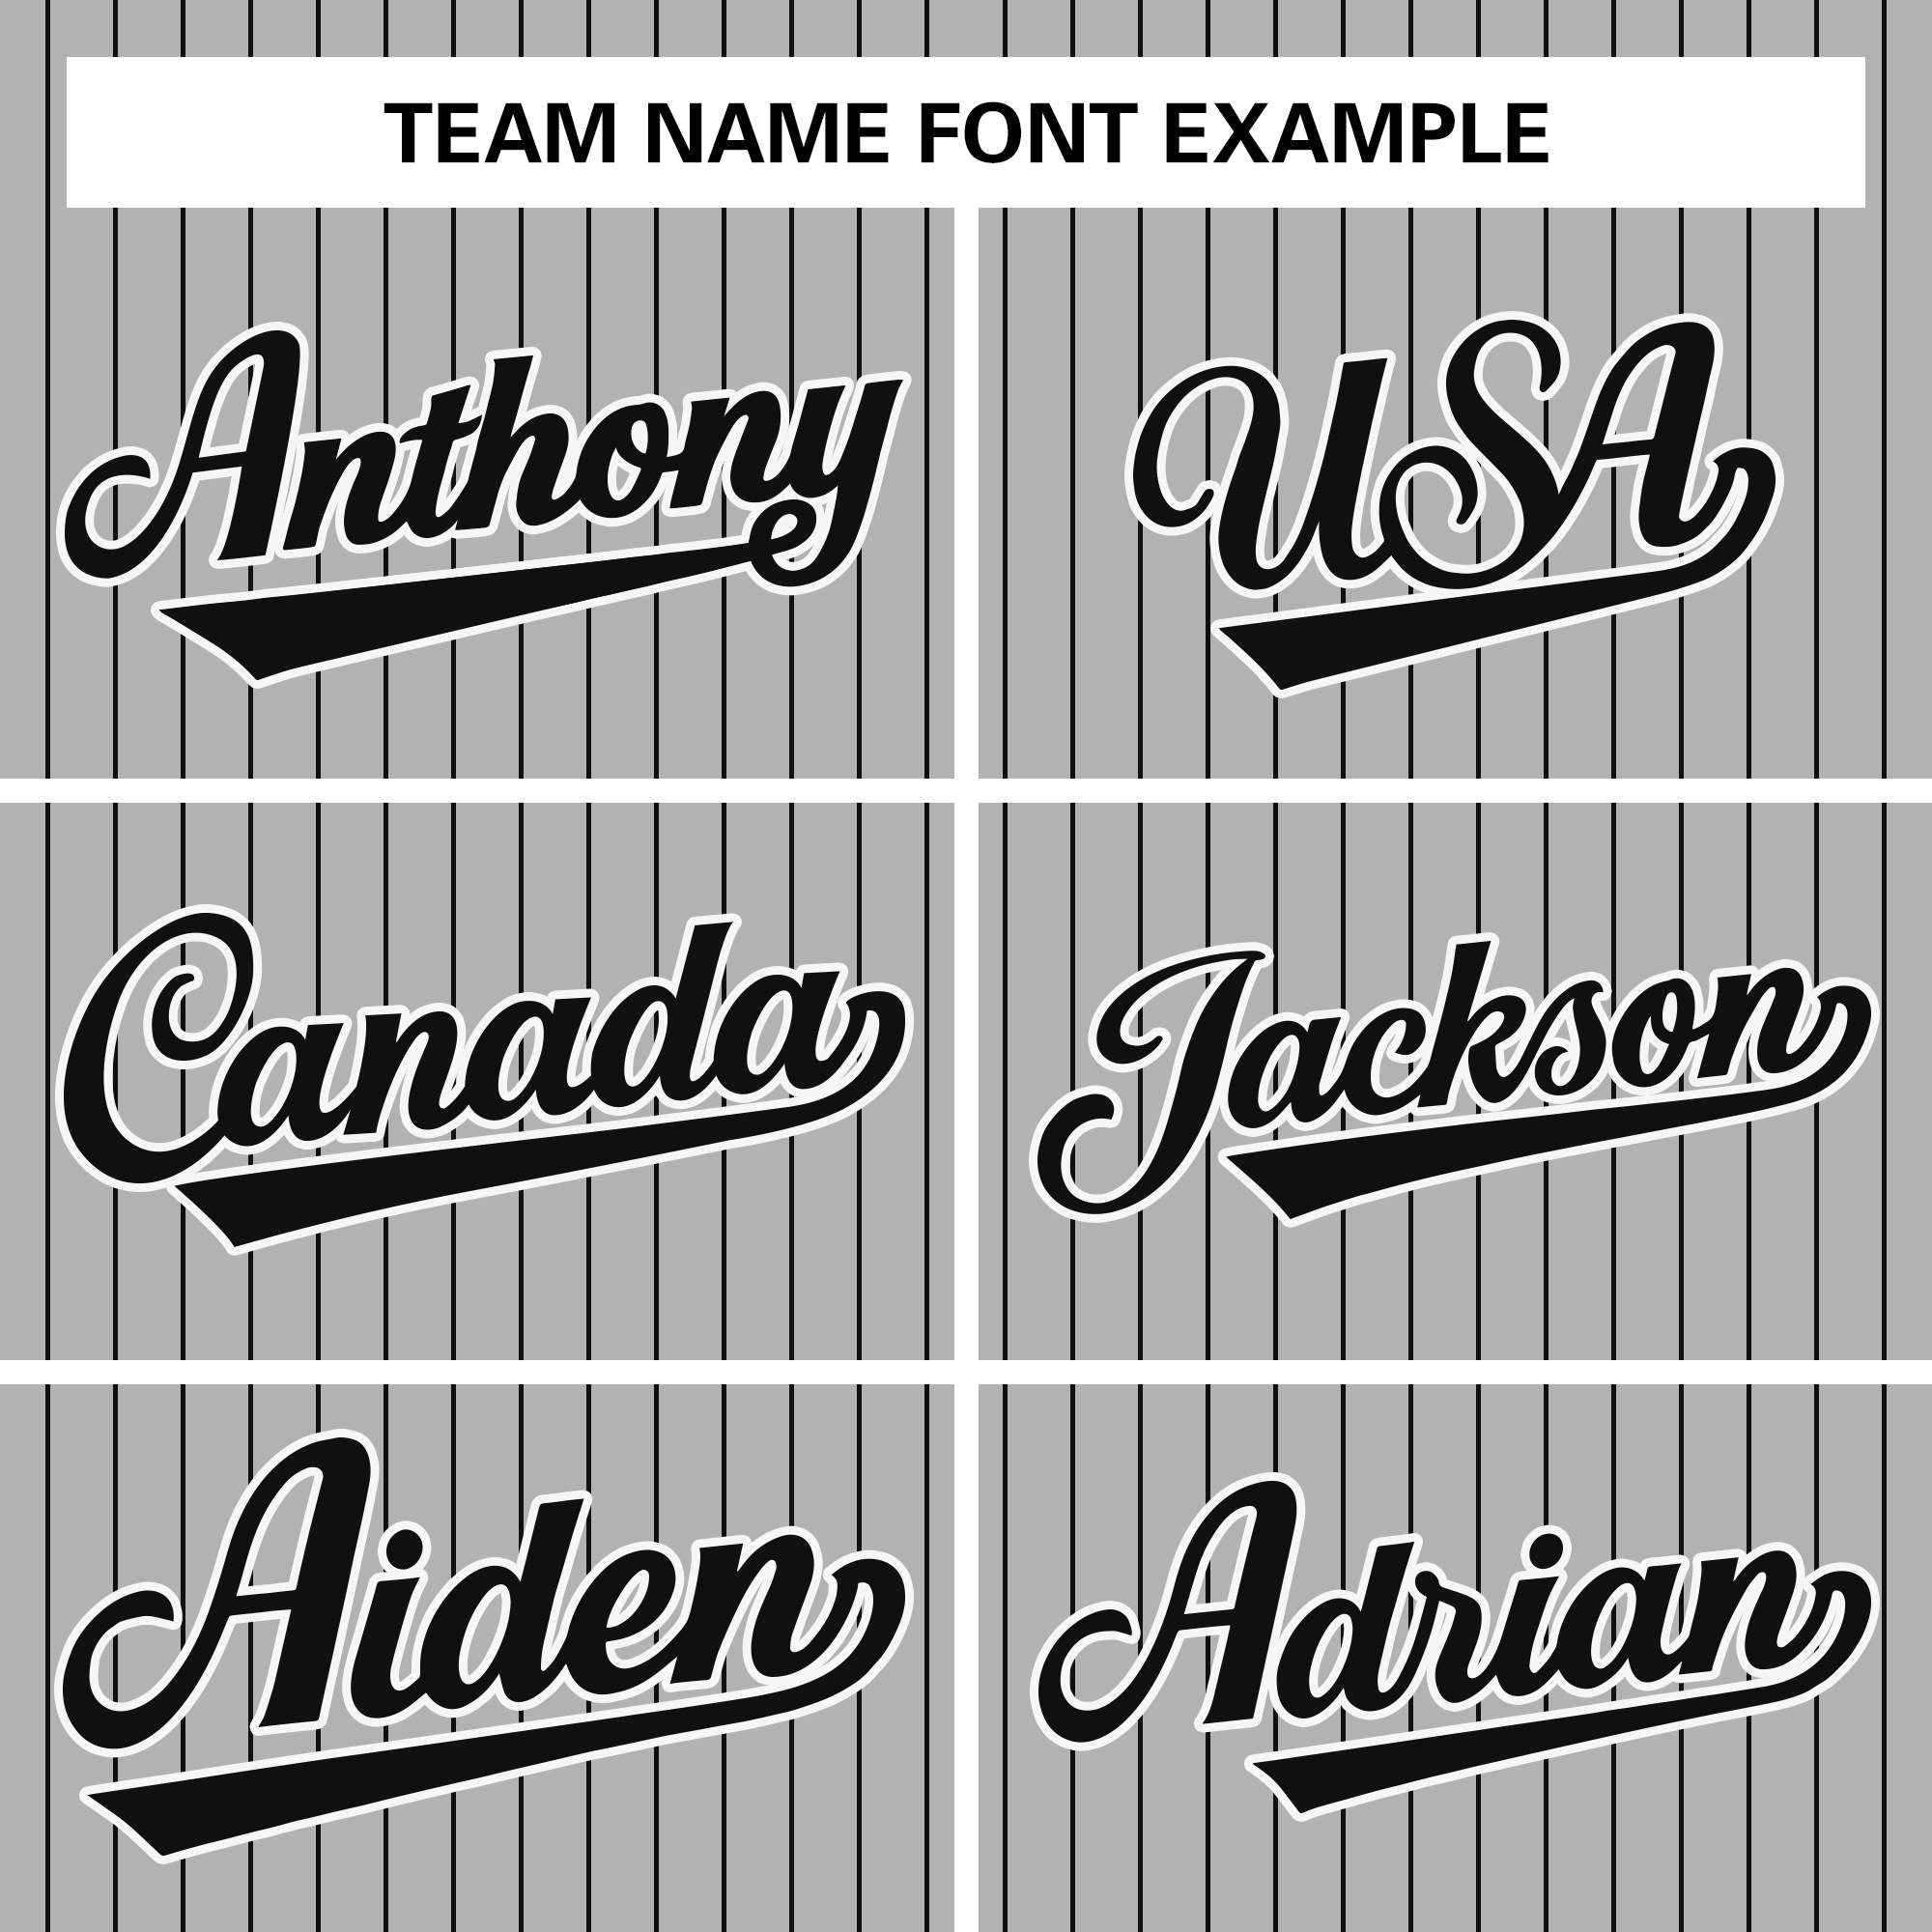 blank striped baseball jersey team name font example